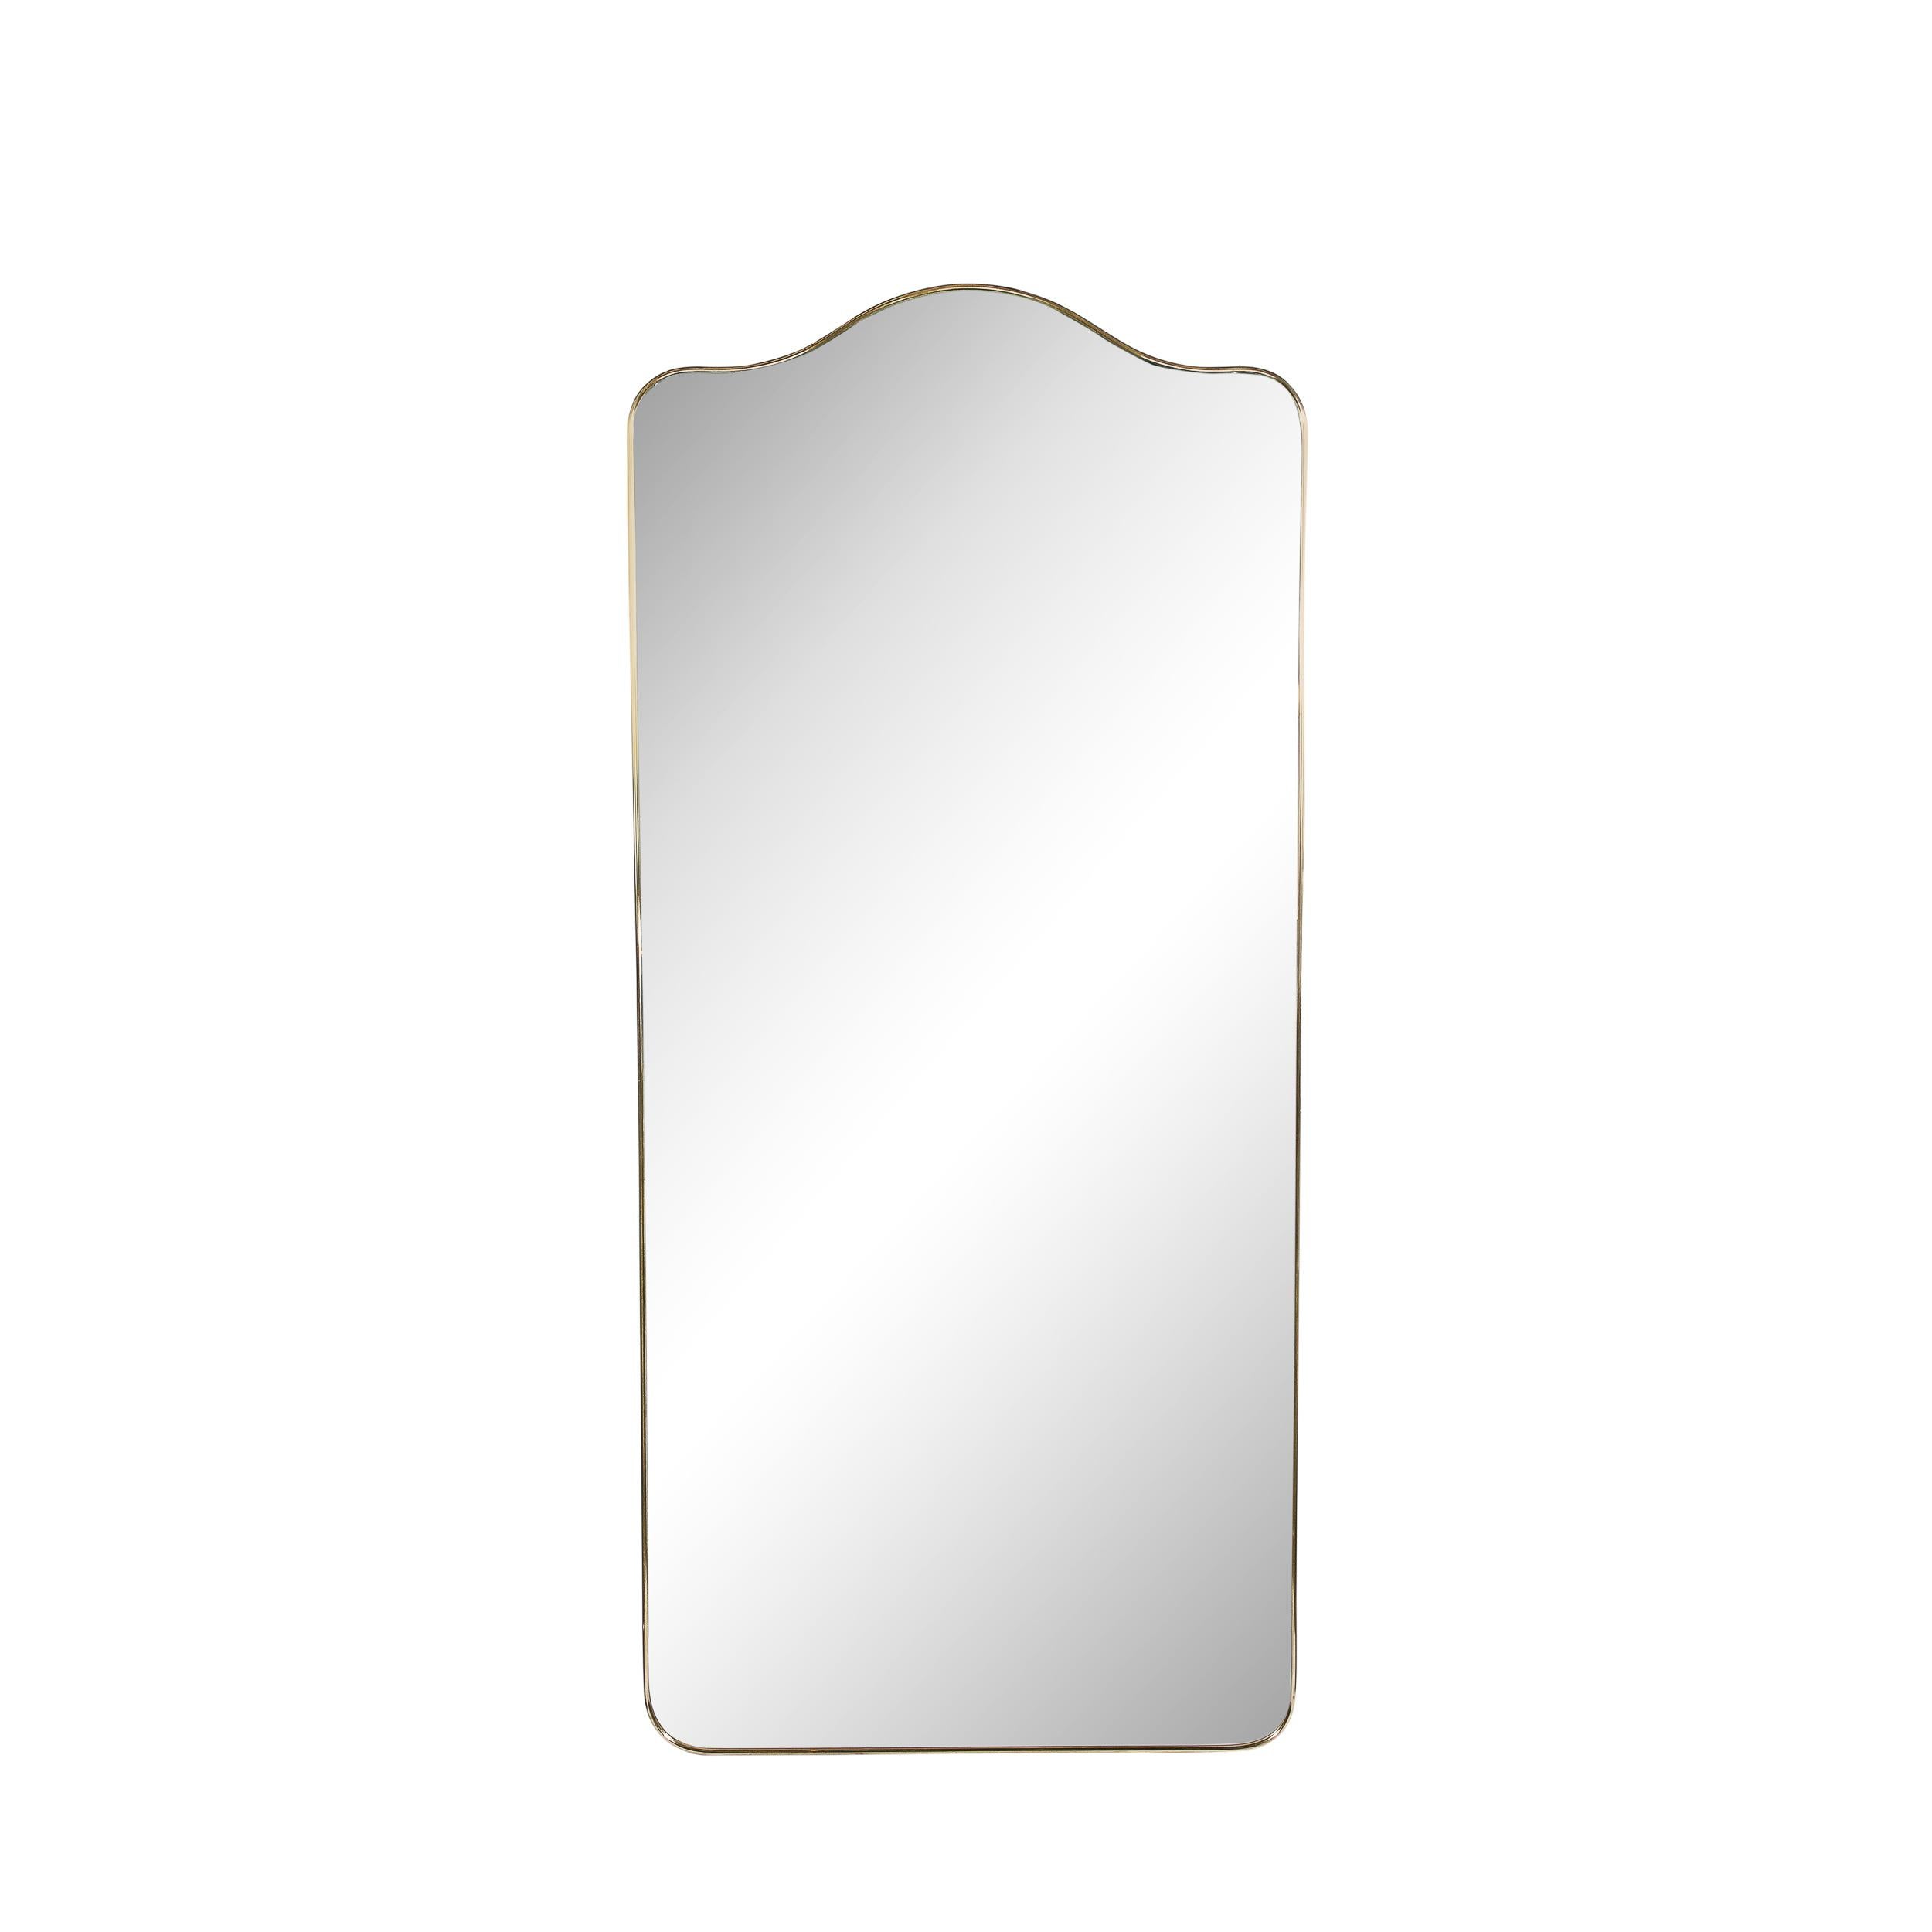 This elegant Mid Century Modern Brass Wrapped Mirror W/Rounded Arch Motif was realized in Italy, circa 1950. It offers a rectangular form with rounded corners and a subtle arch form motif top wrapped in lustrous brass, while the interior is plain